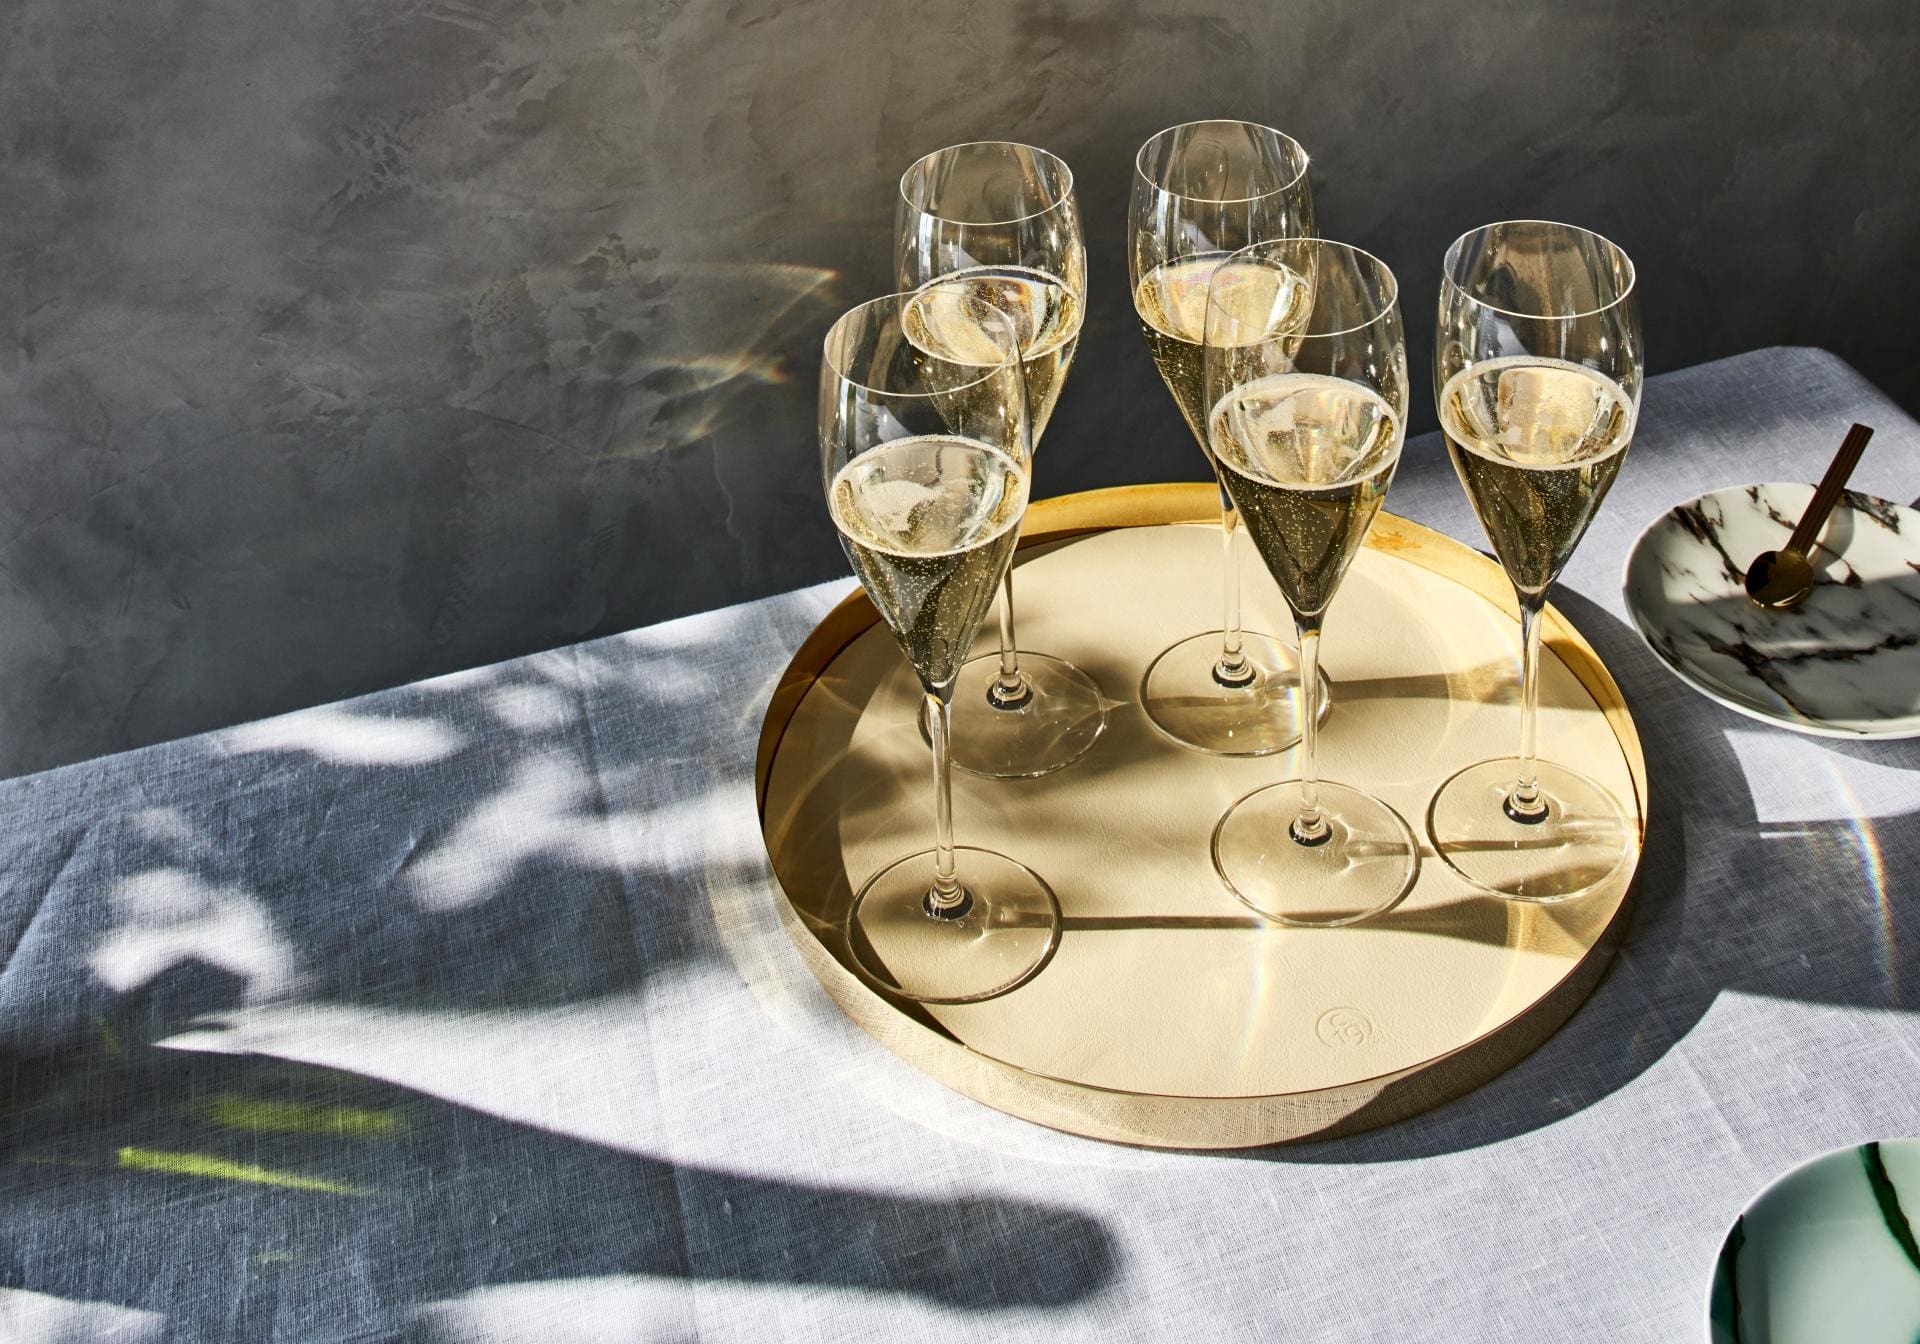 LVMH's Champagne strategy drives innovation and new consumption